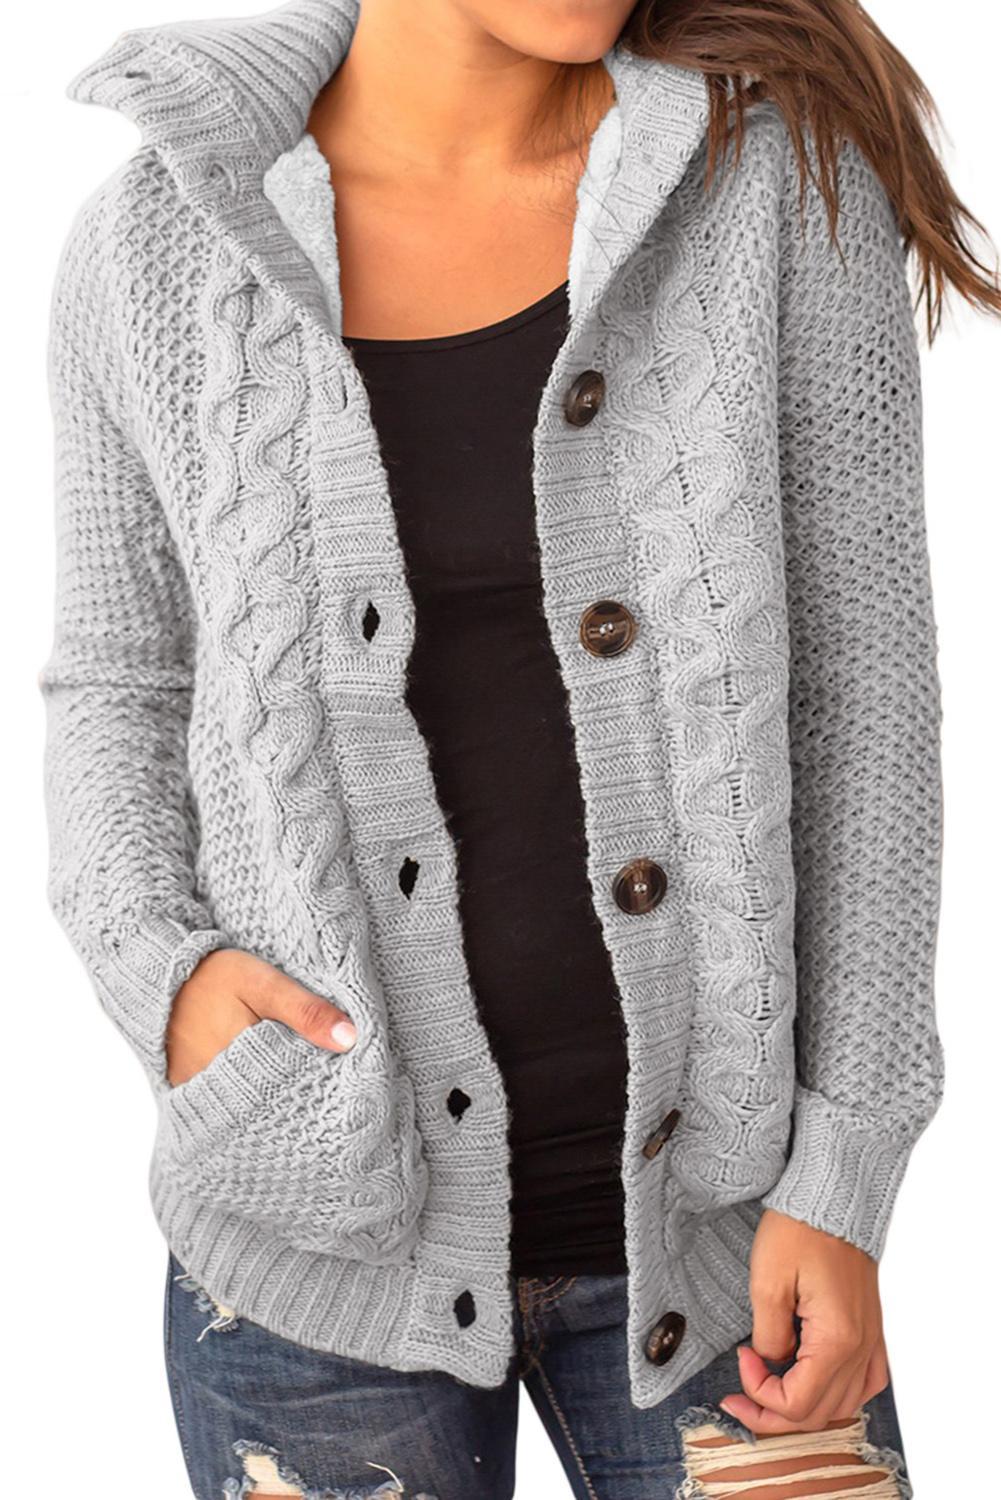 $ 29.99 - Asvivid Womens Button Down Cable Knit Cardigans Fleece Hooded ...